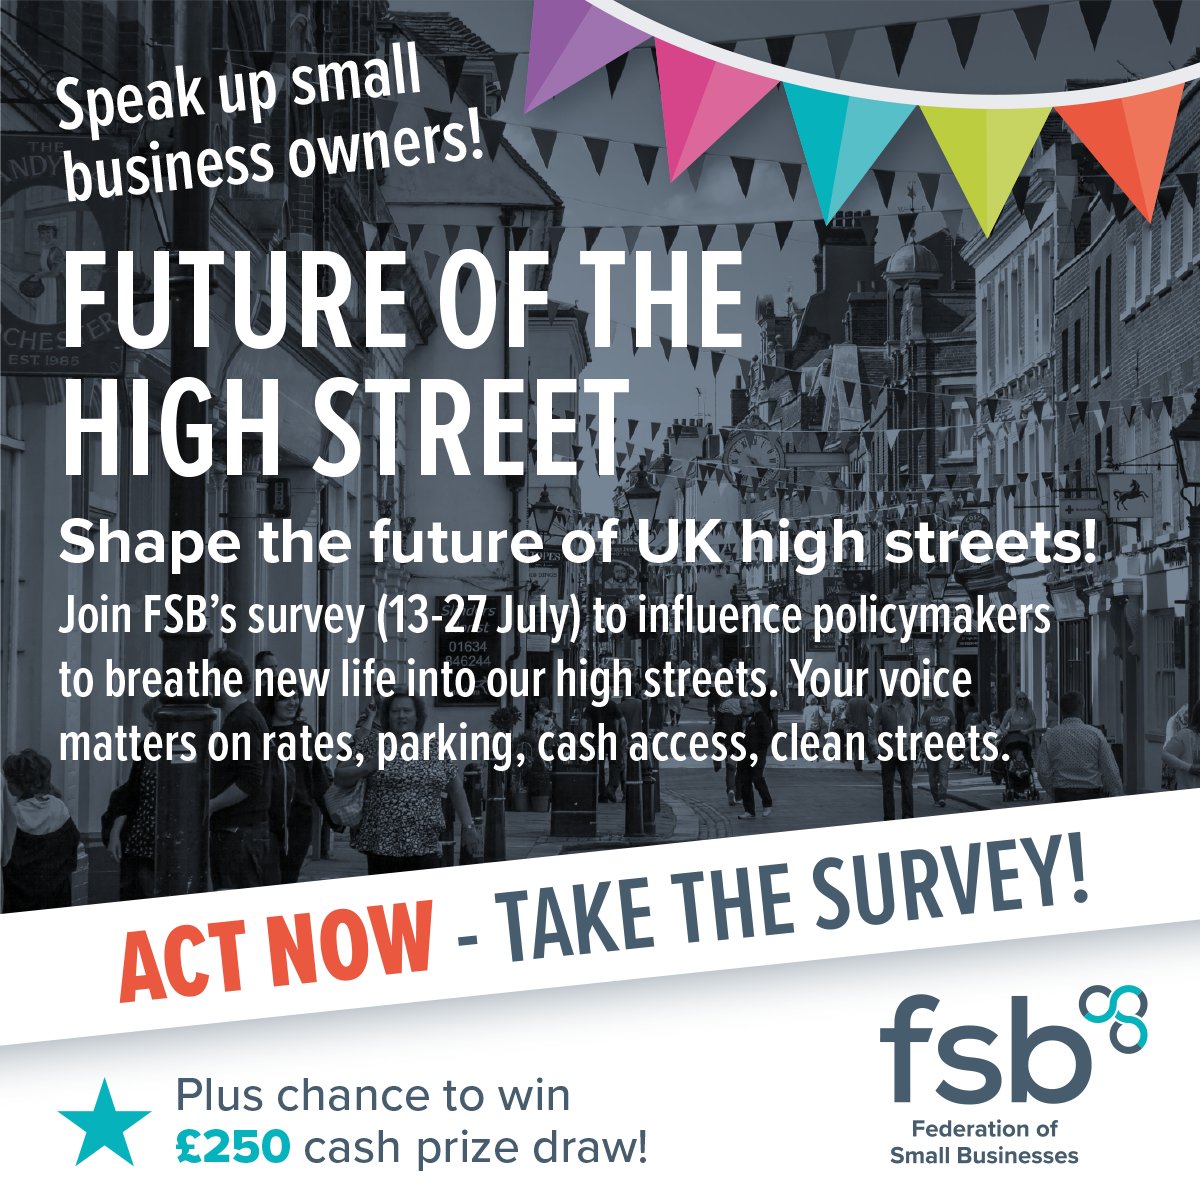 SMEs, shape the future of UK high streets! 🏬 Join @fsb_policy's online survey (13-27 July) to influence policymakers to breathe new life into high streets. Your views matter on rates, cash access, clean streets - and a £250 prize draw! Take the survey: fsbbigvoice.co.uk/FSBHighStreets…